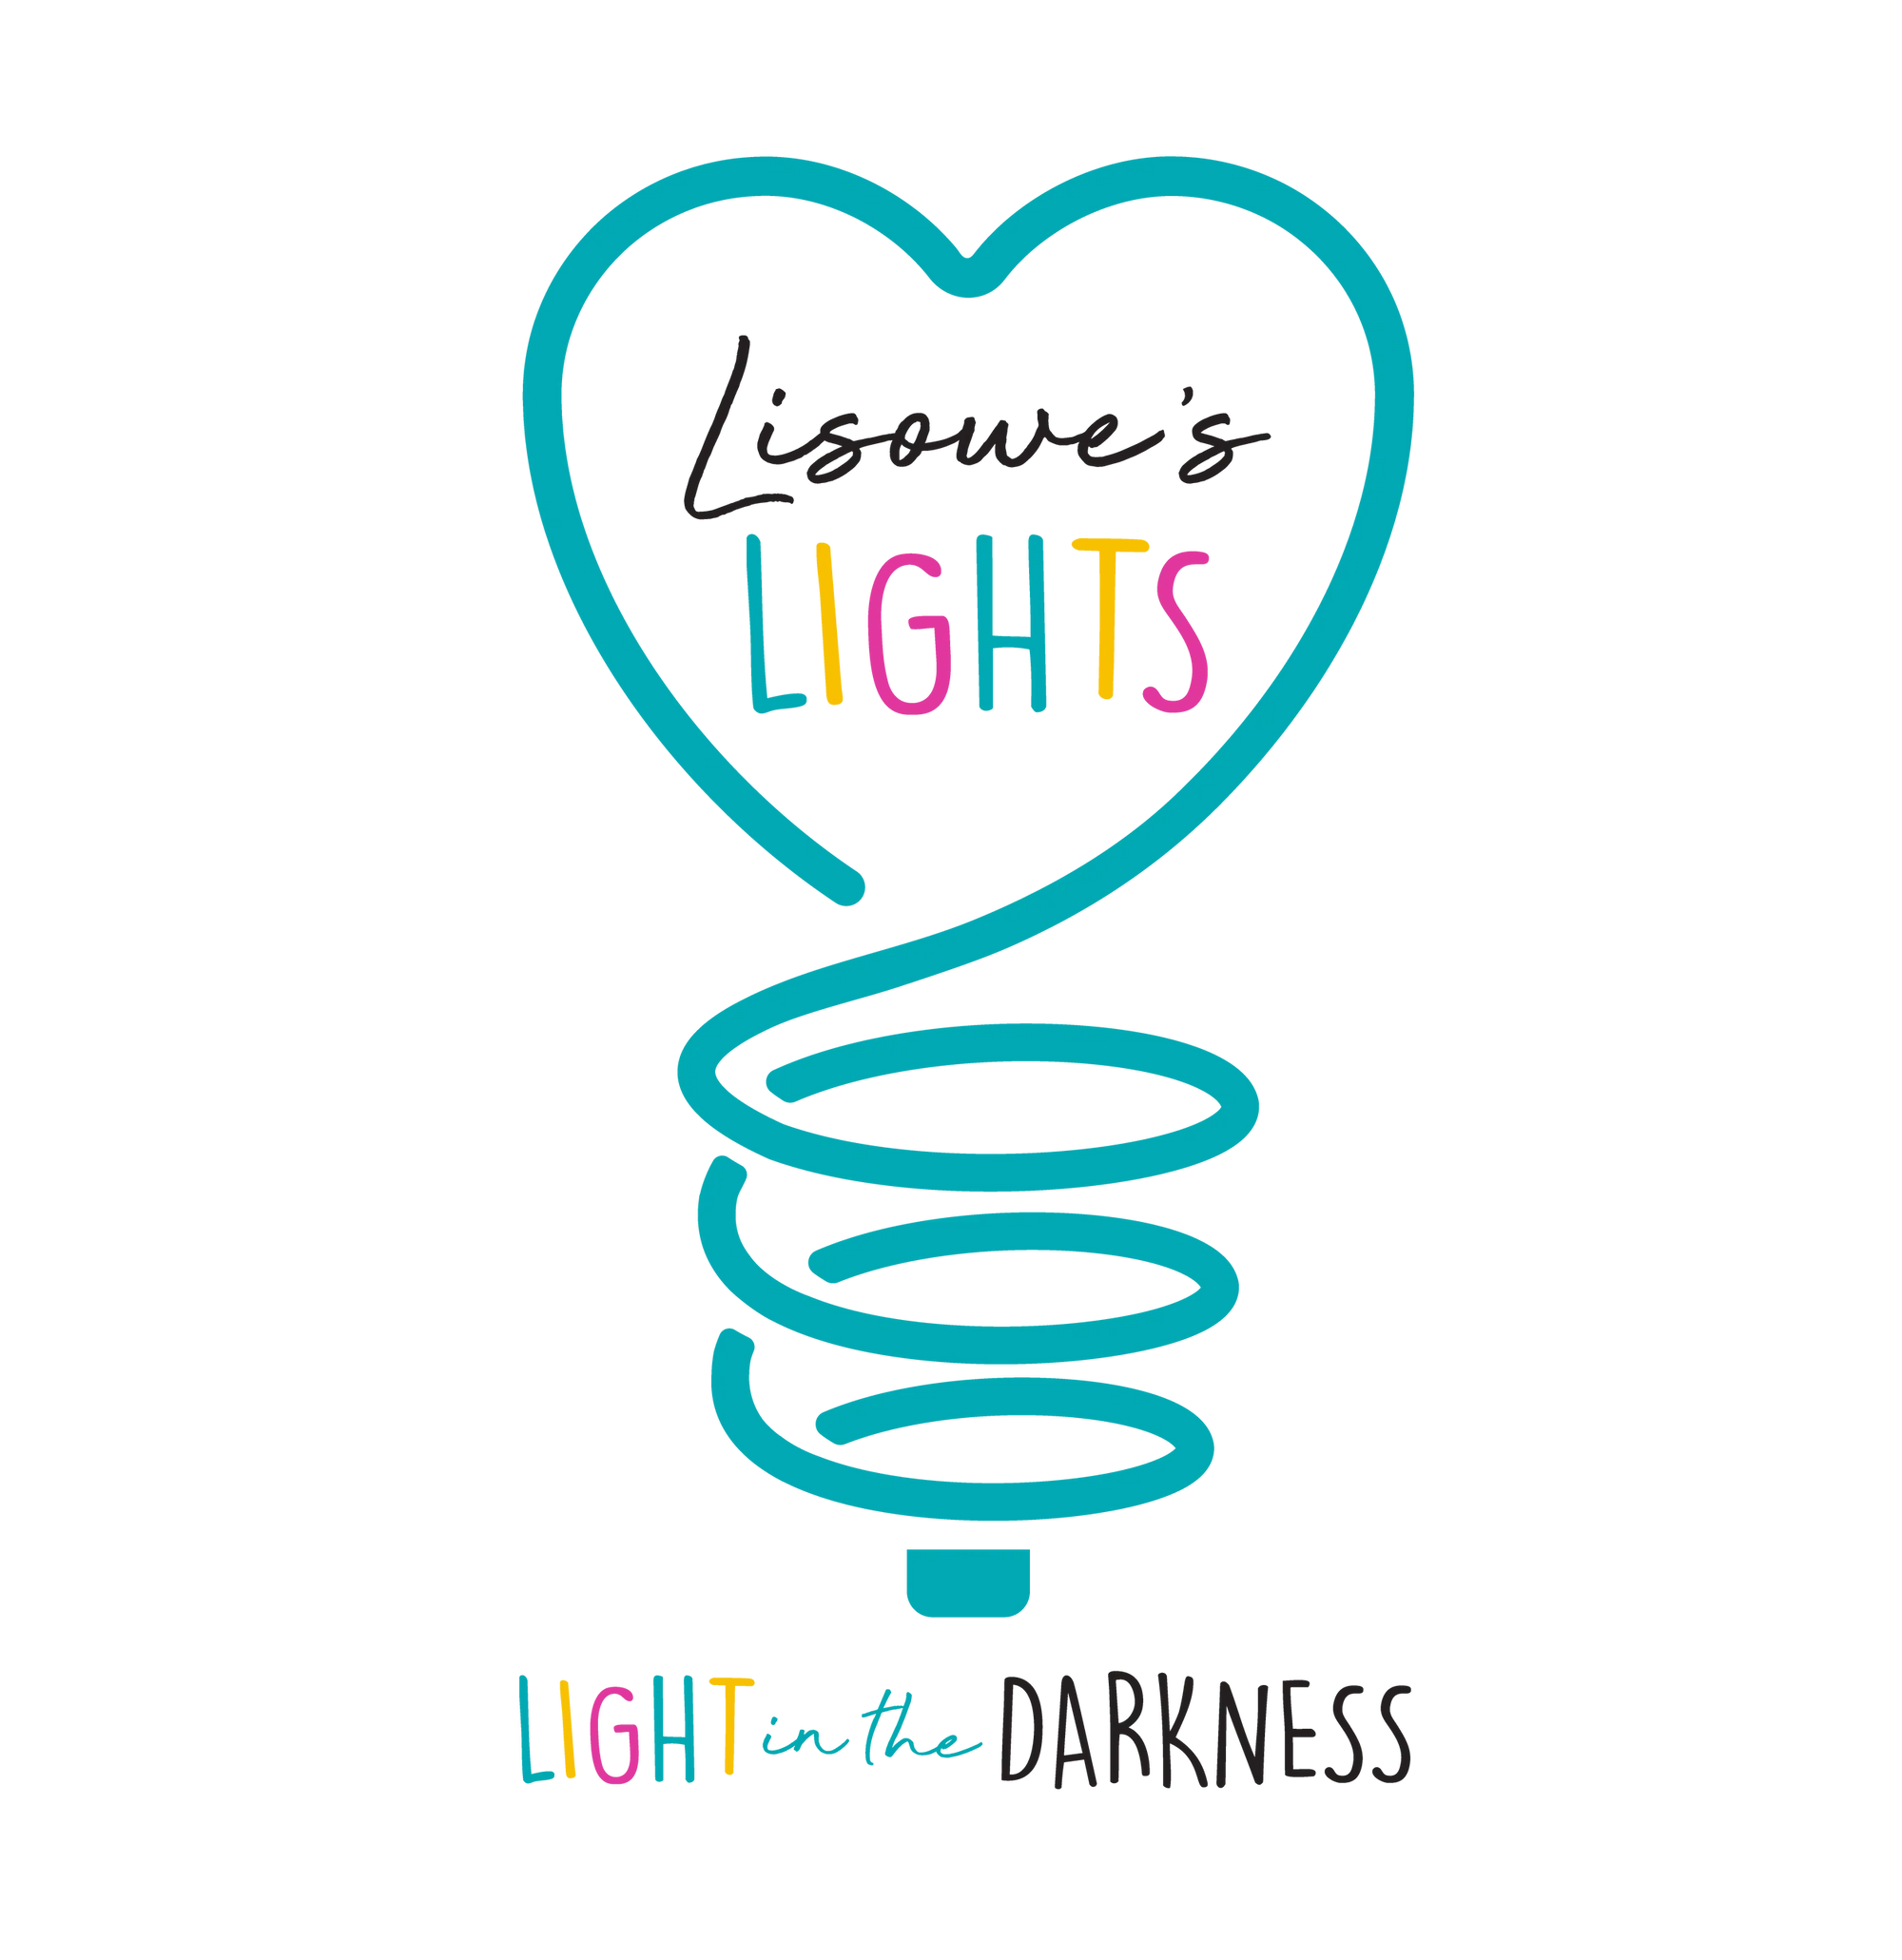 Lisowe's lights logo includes text that reads Light in the darkness 